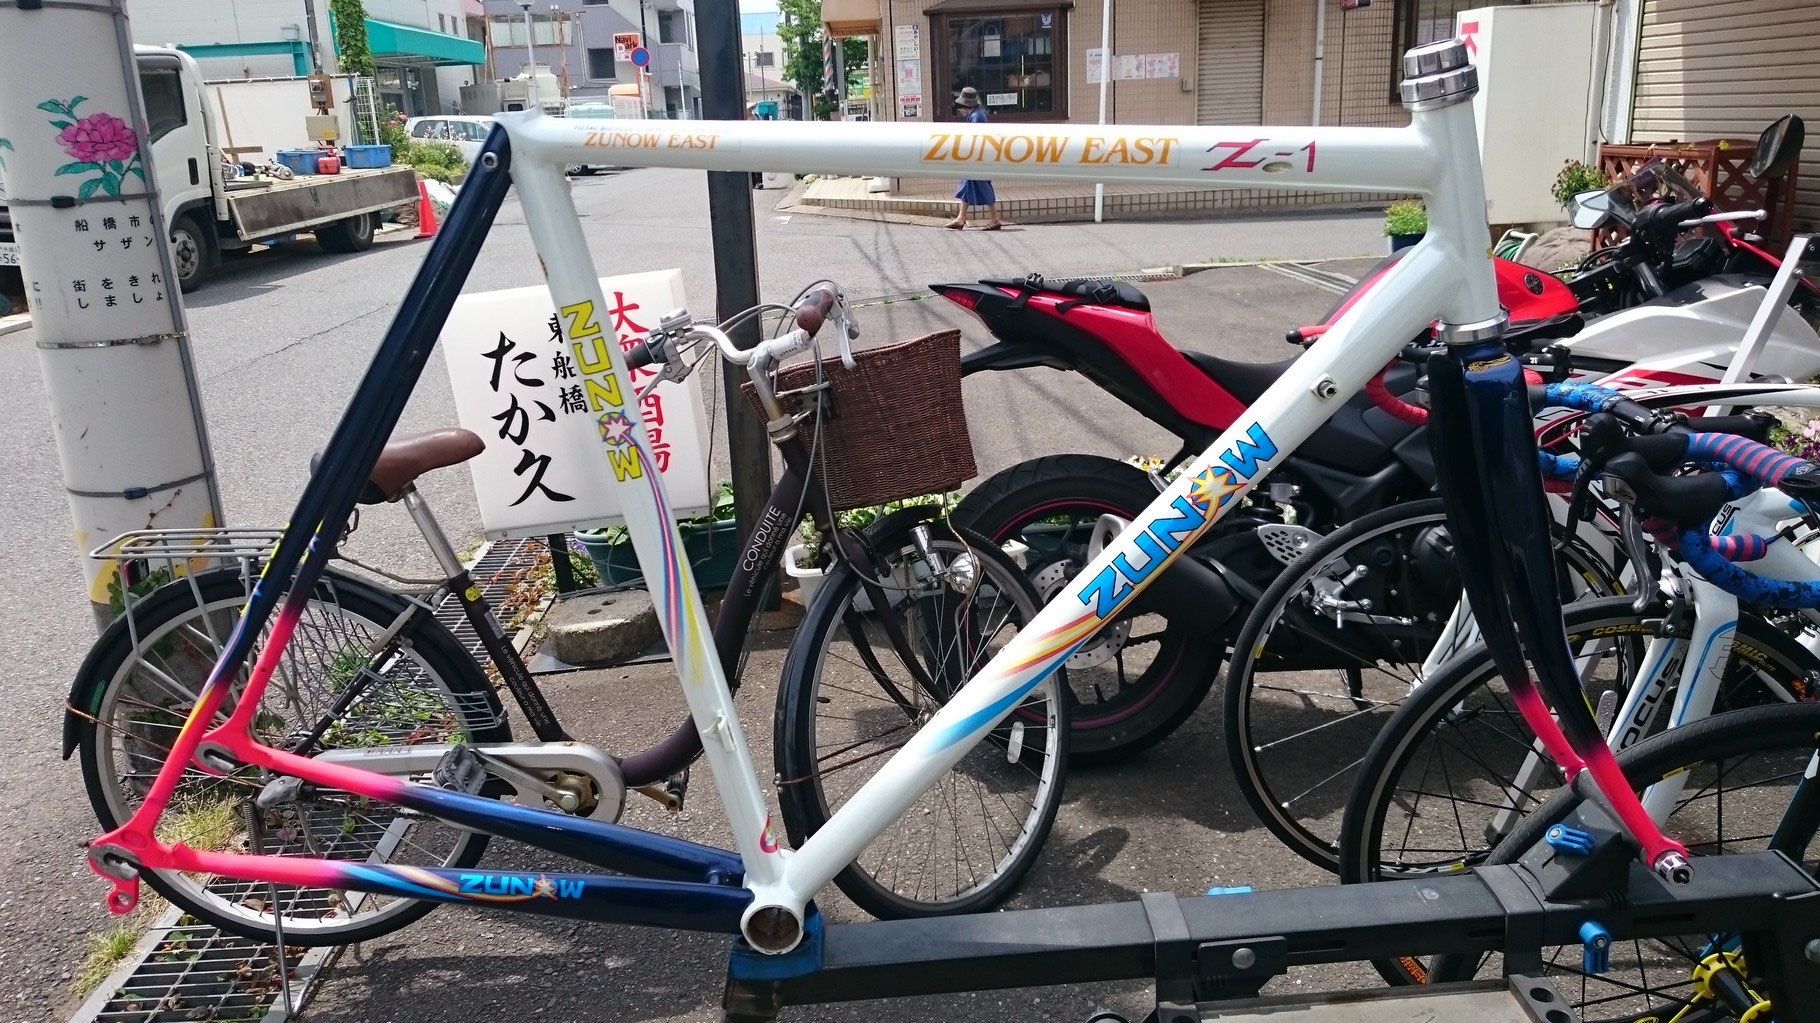 ZUNOW Z-1 MAX - 船橋の自転車専門店ZUNOW EAST - TOTAL BICYCLE 